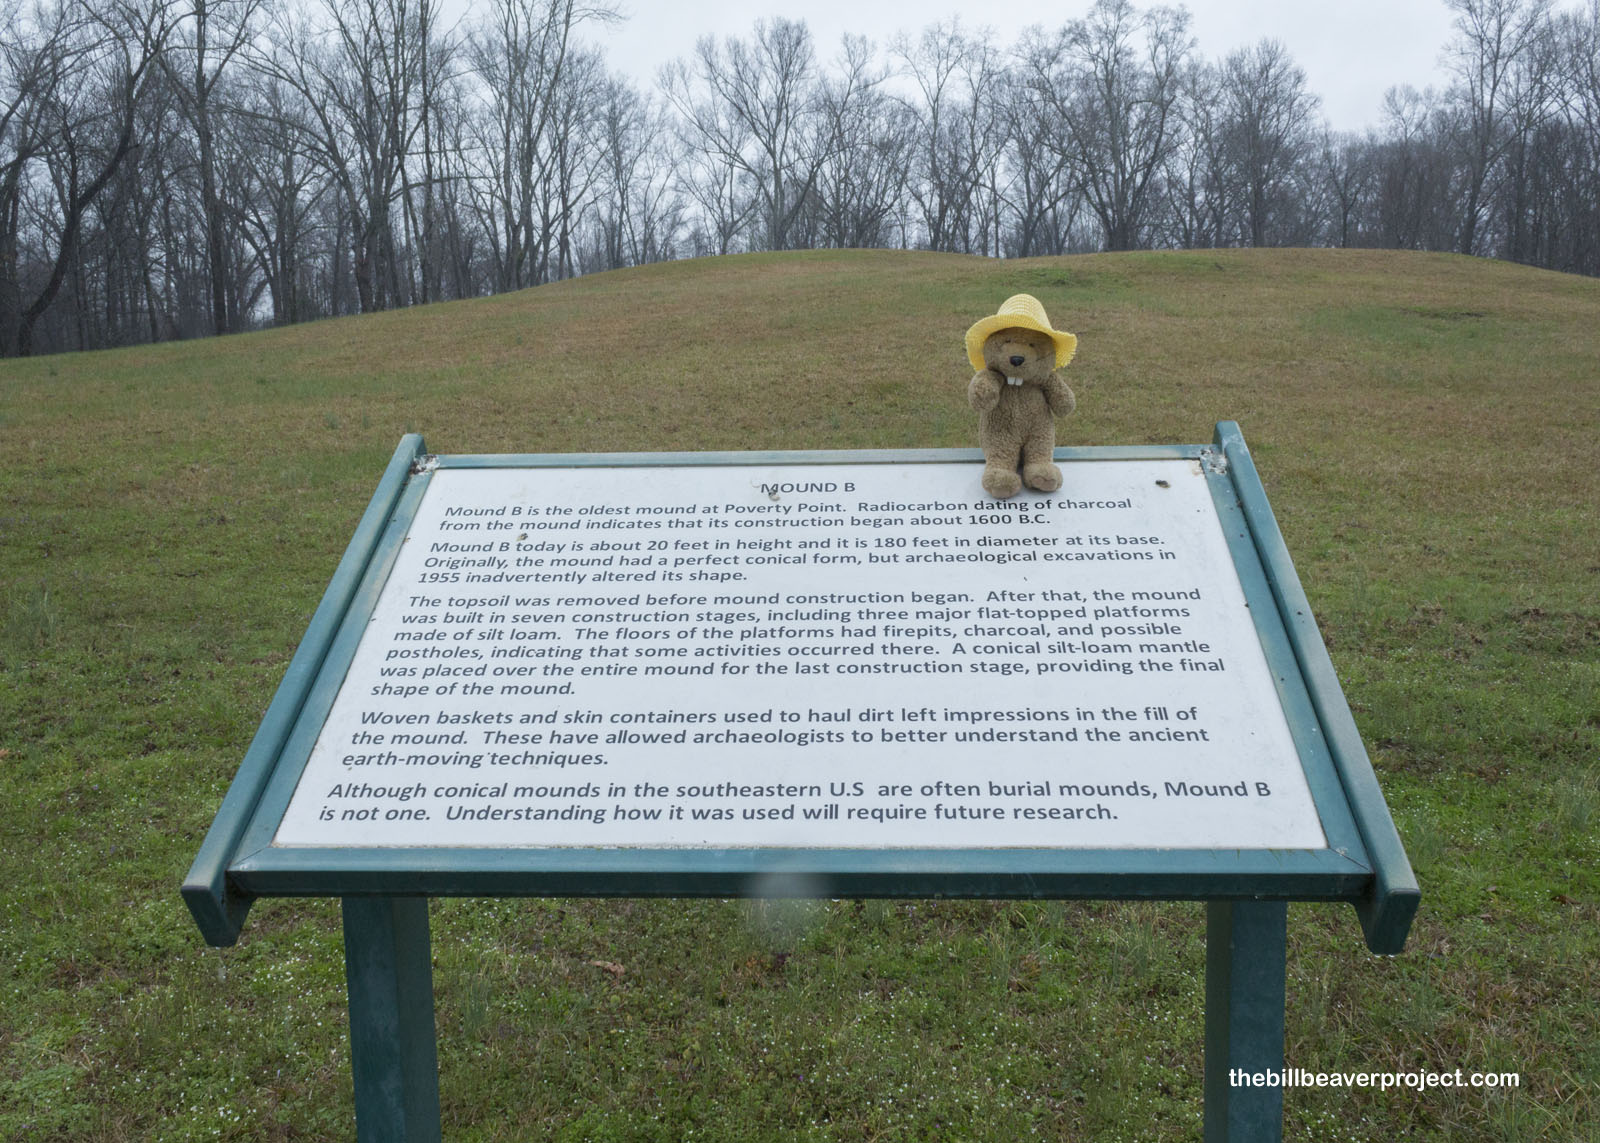 Mound B is the oldest mound at Poverty Point!